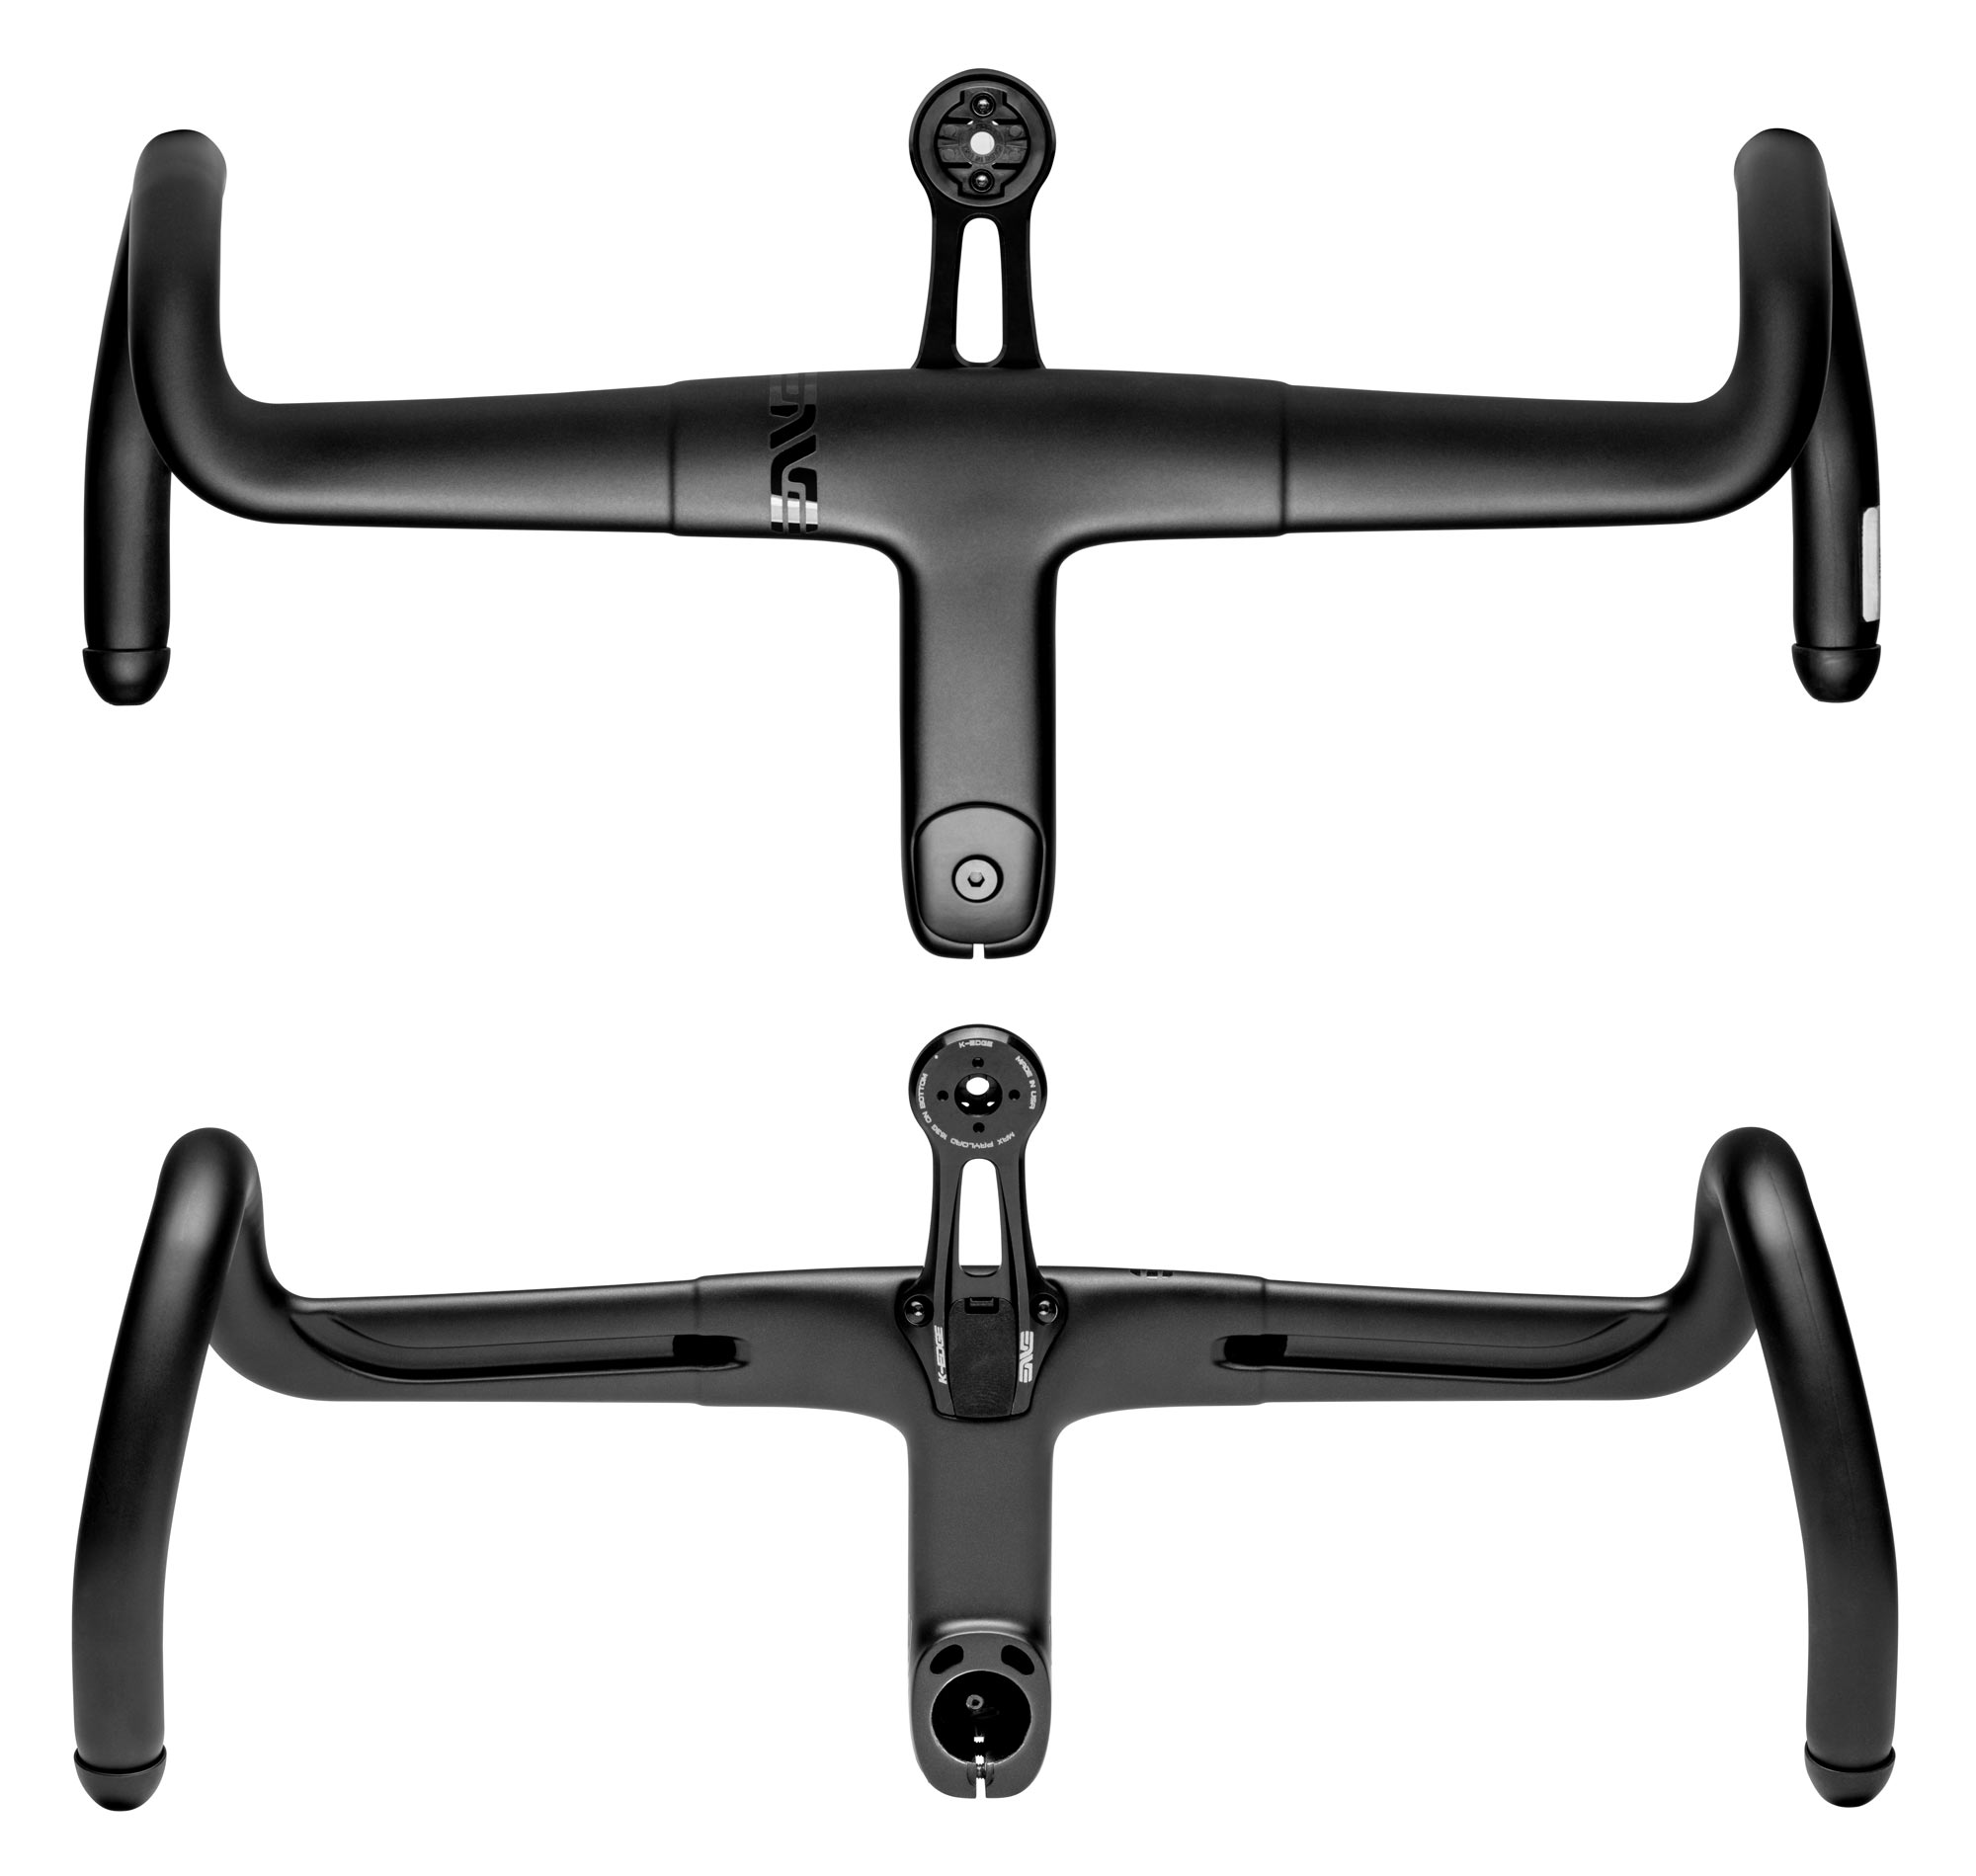 enve ses ar inroute bar stem combo shown from top and bottom